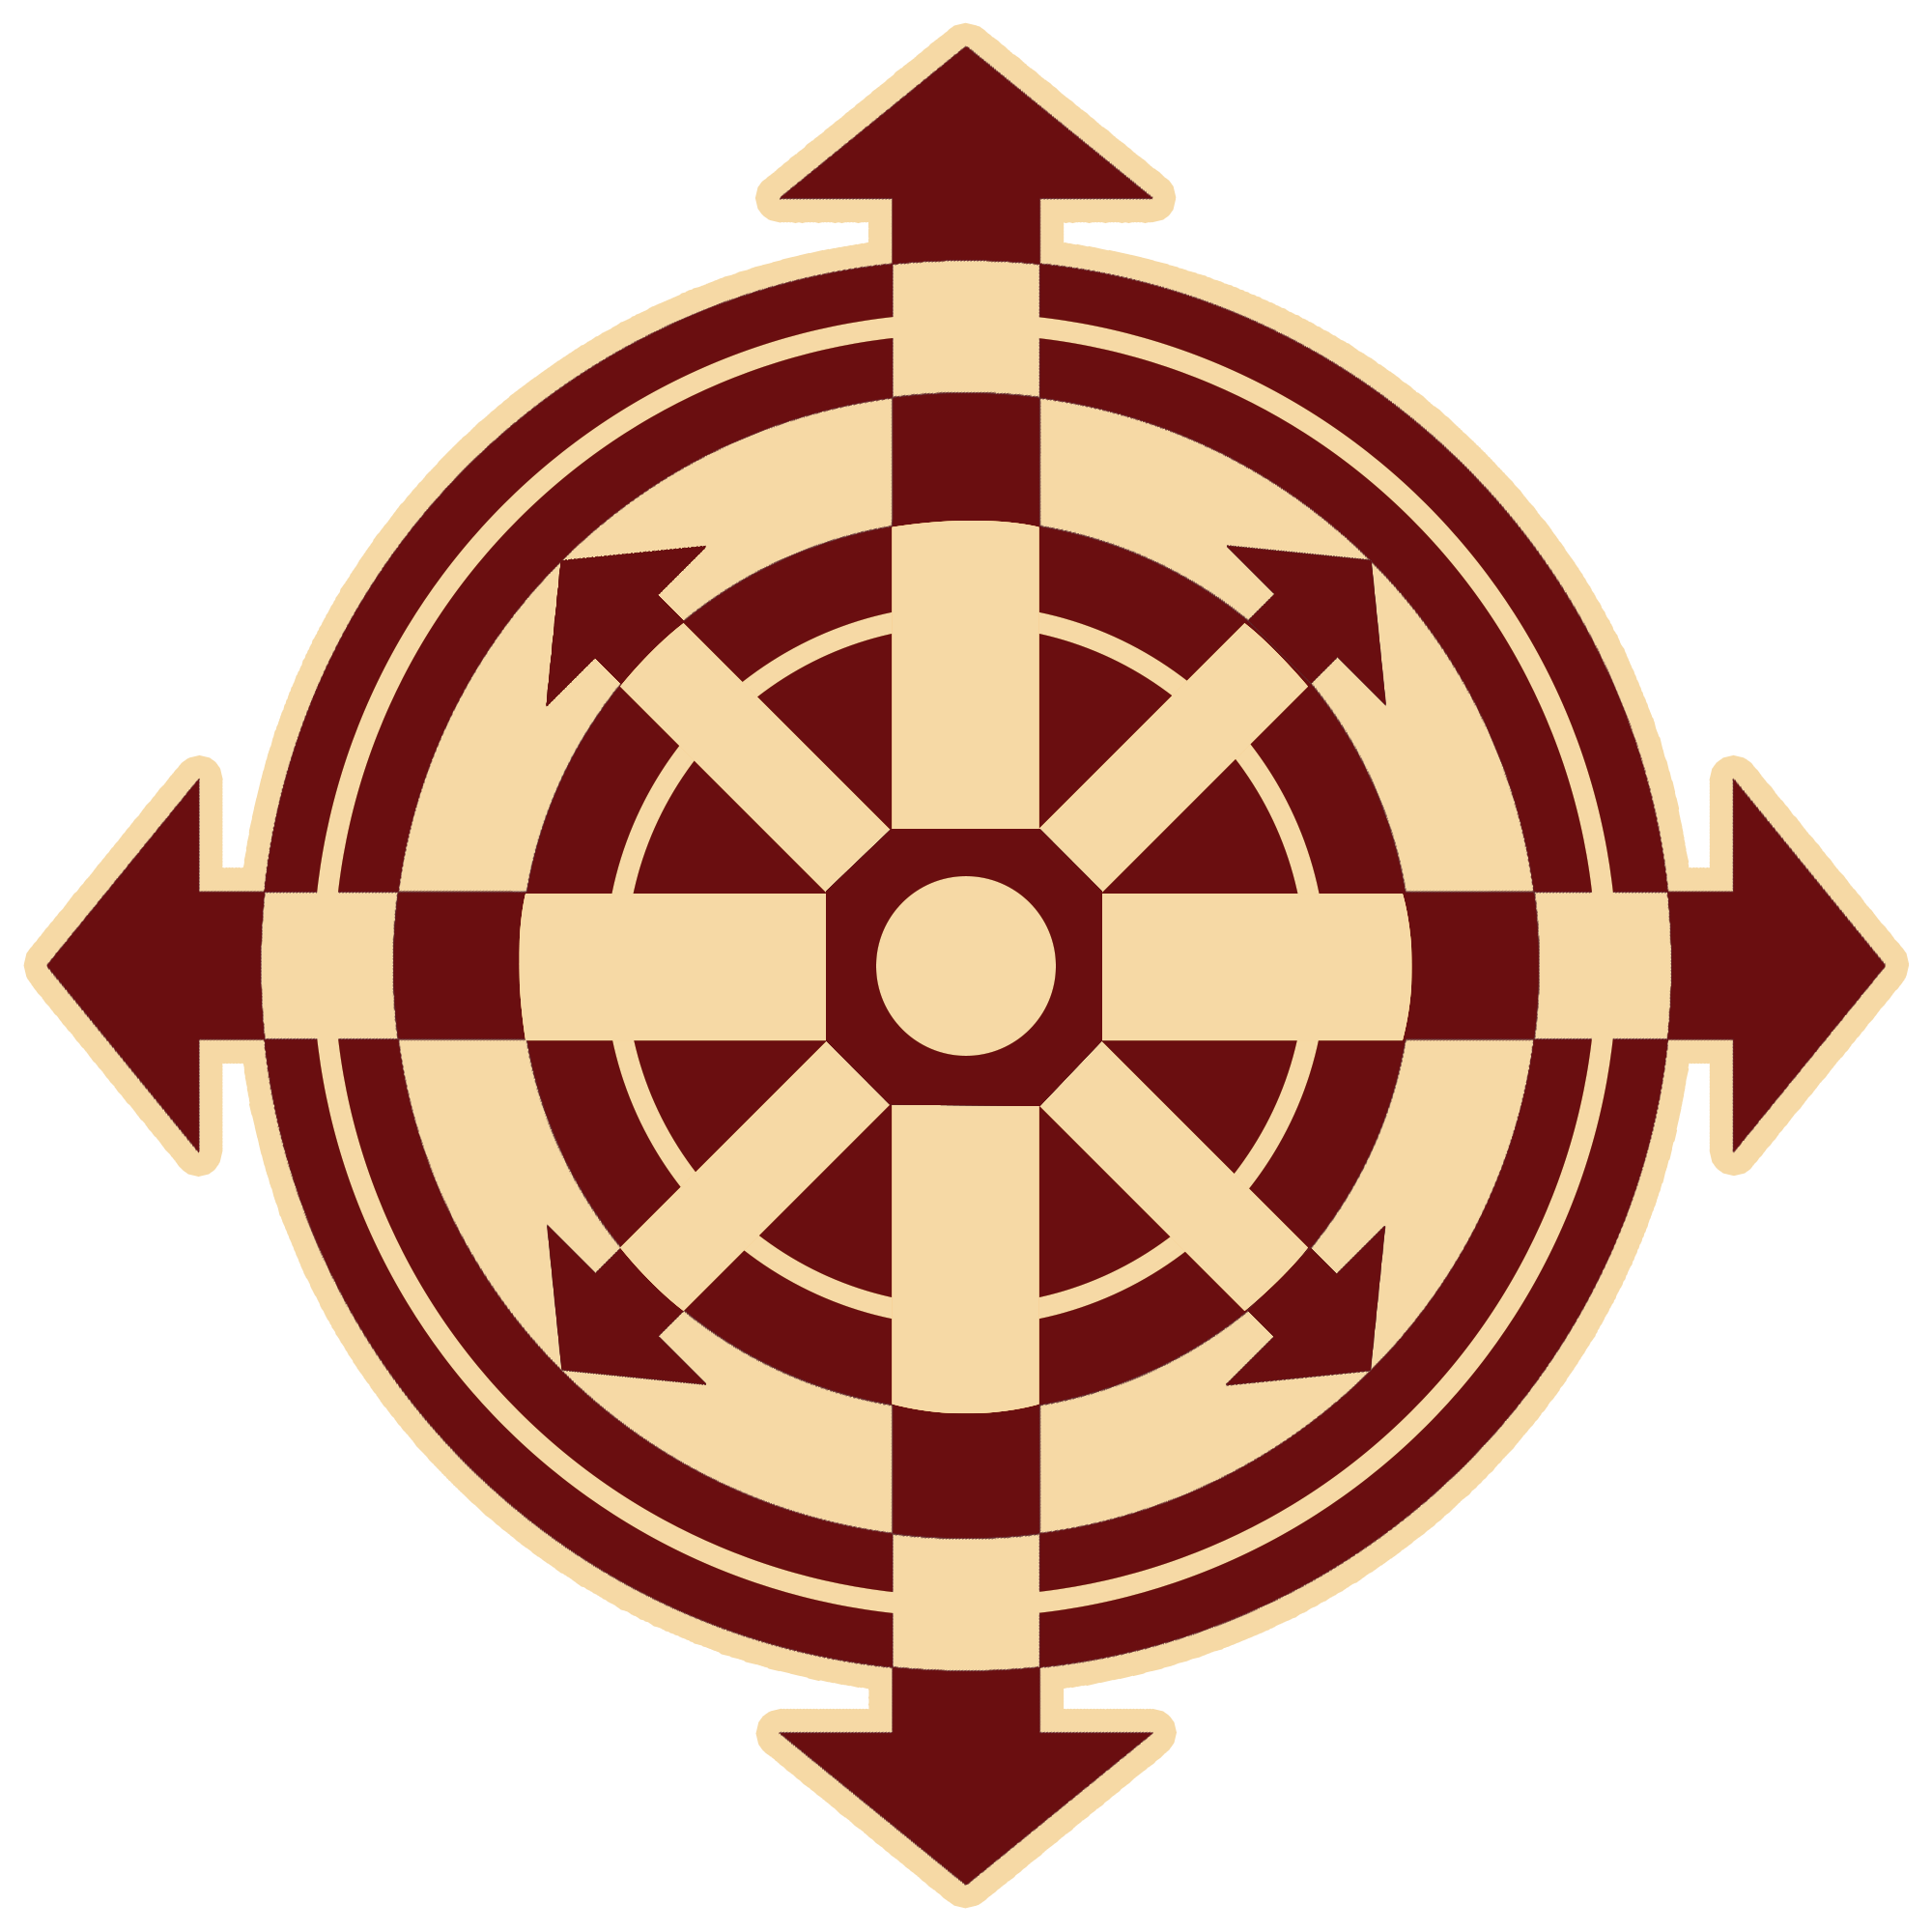 Pathfinder Society Agnostic symbol. A circle with arrows pointing in the four cardinal directions with four smaller arrows pointing out between the four larger arrows